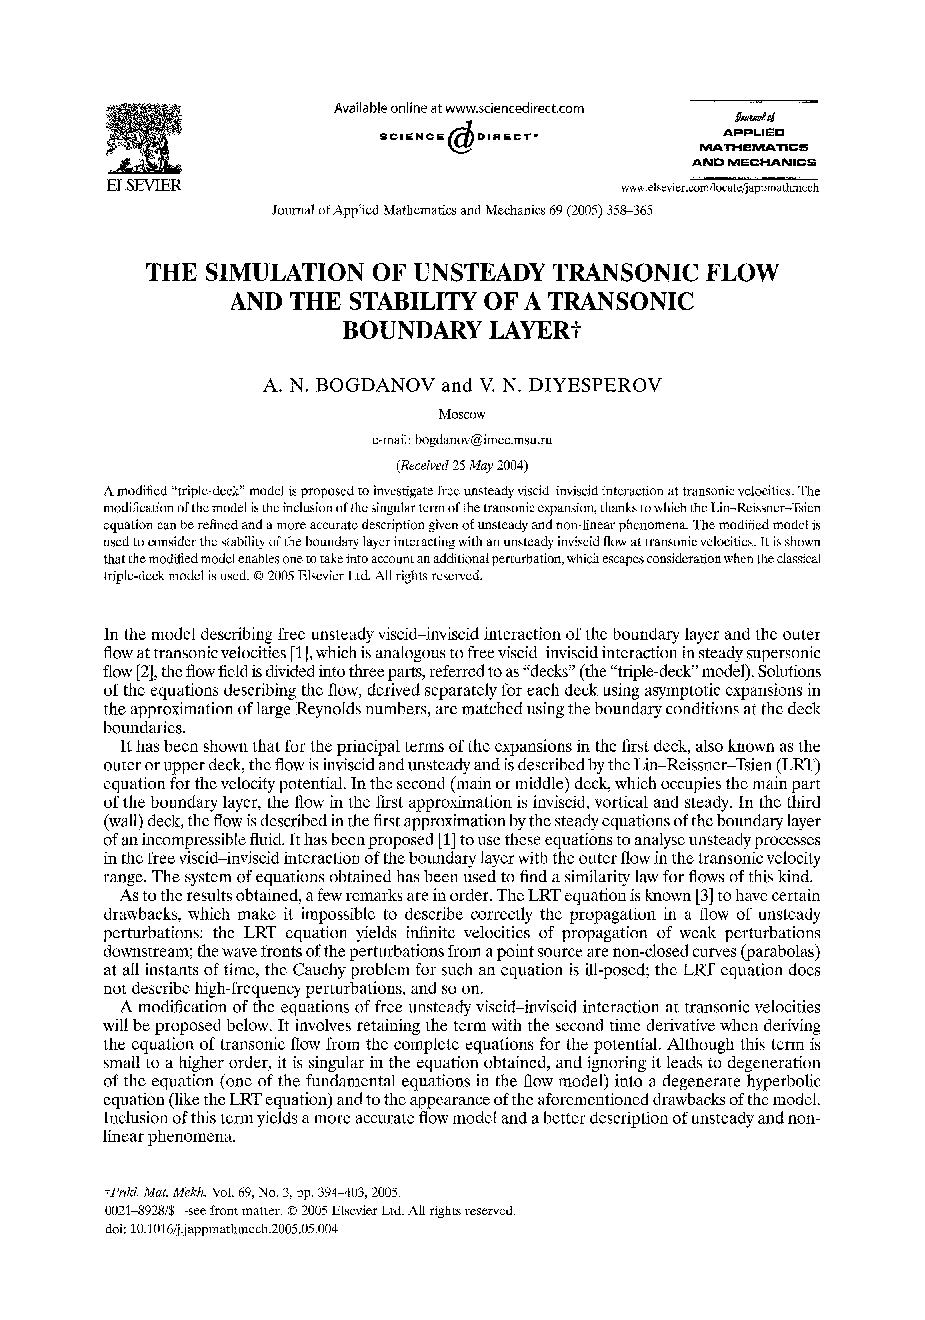 The simulation of unsteady transonic flow and the stability of a transonic boundary layer